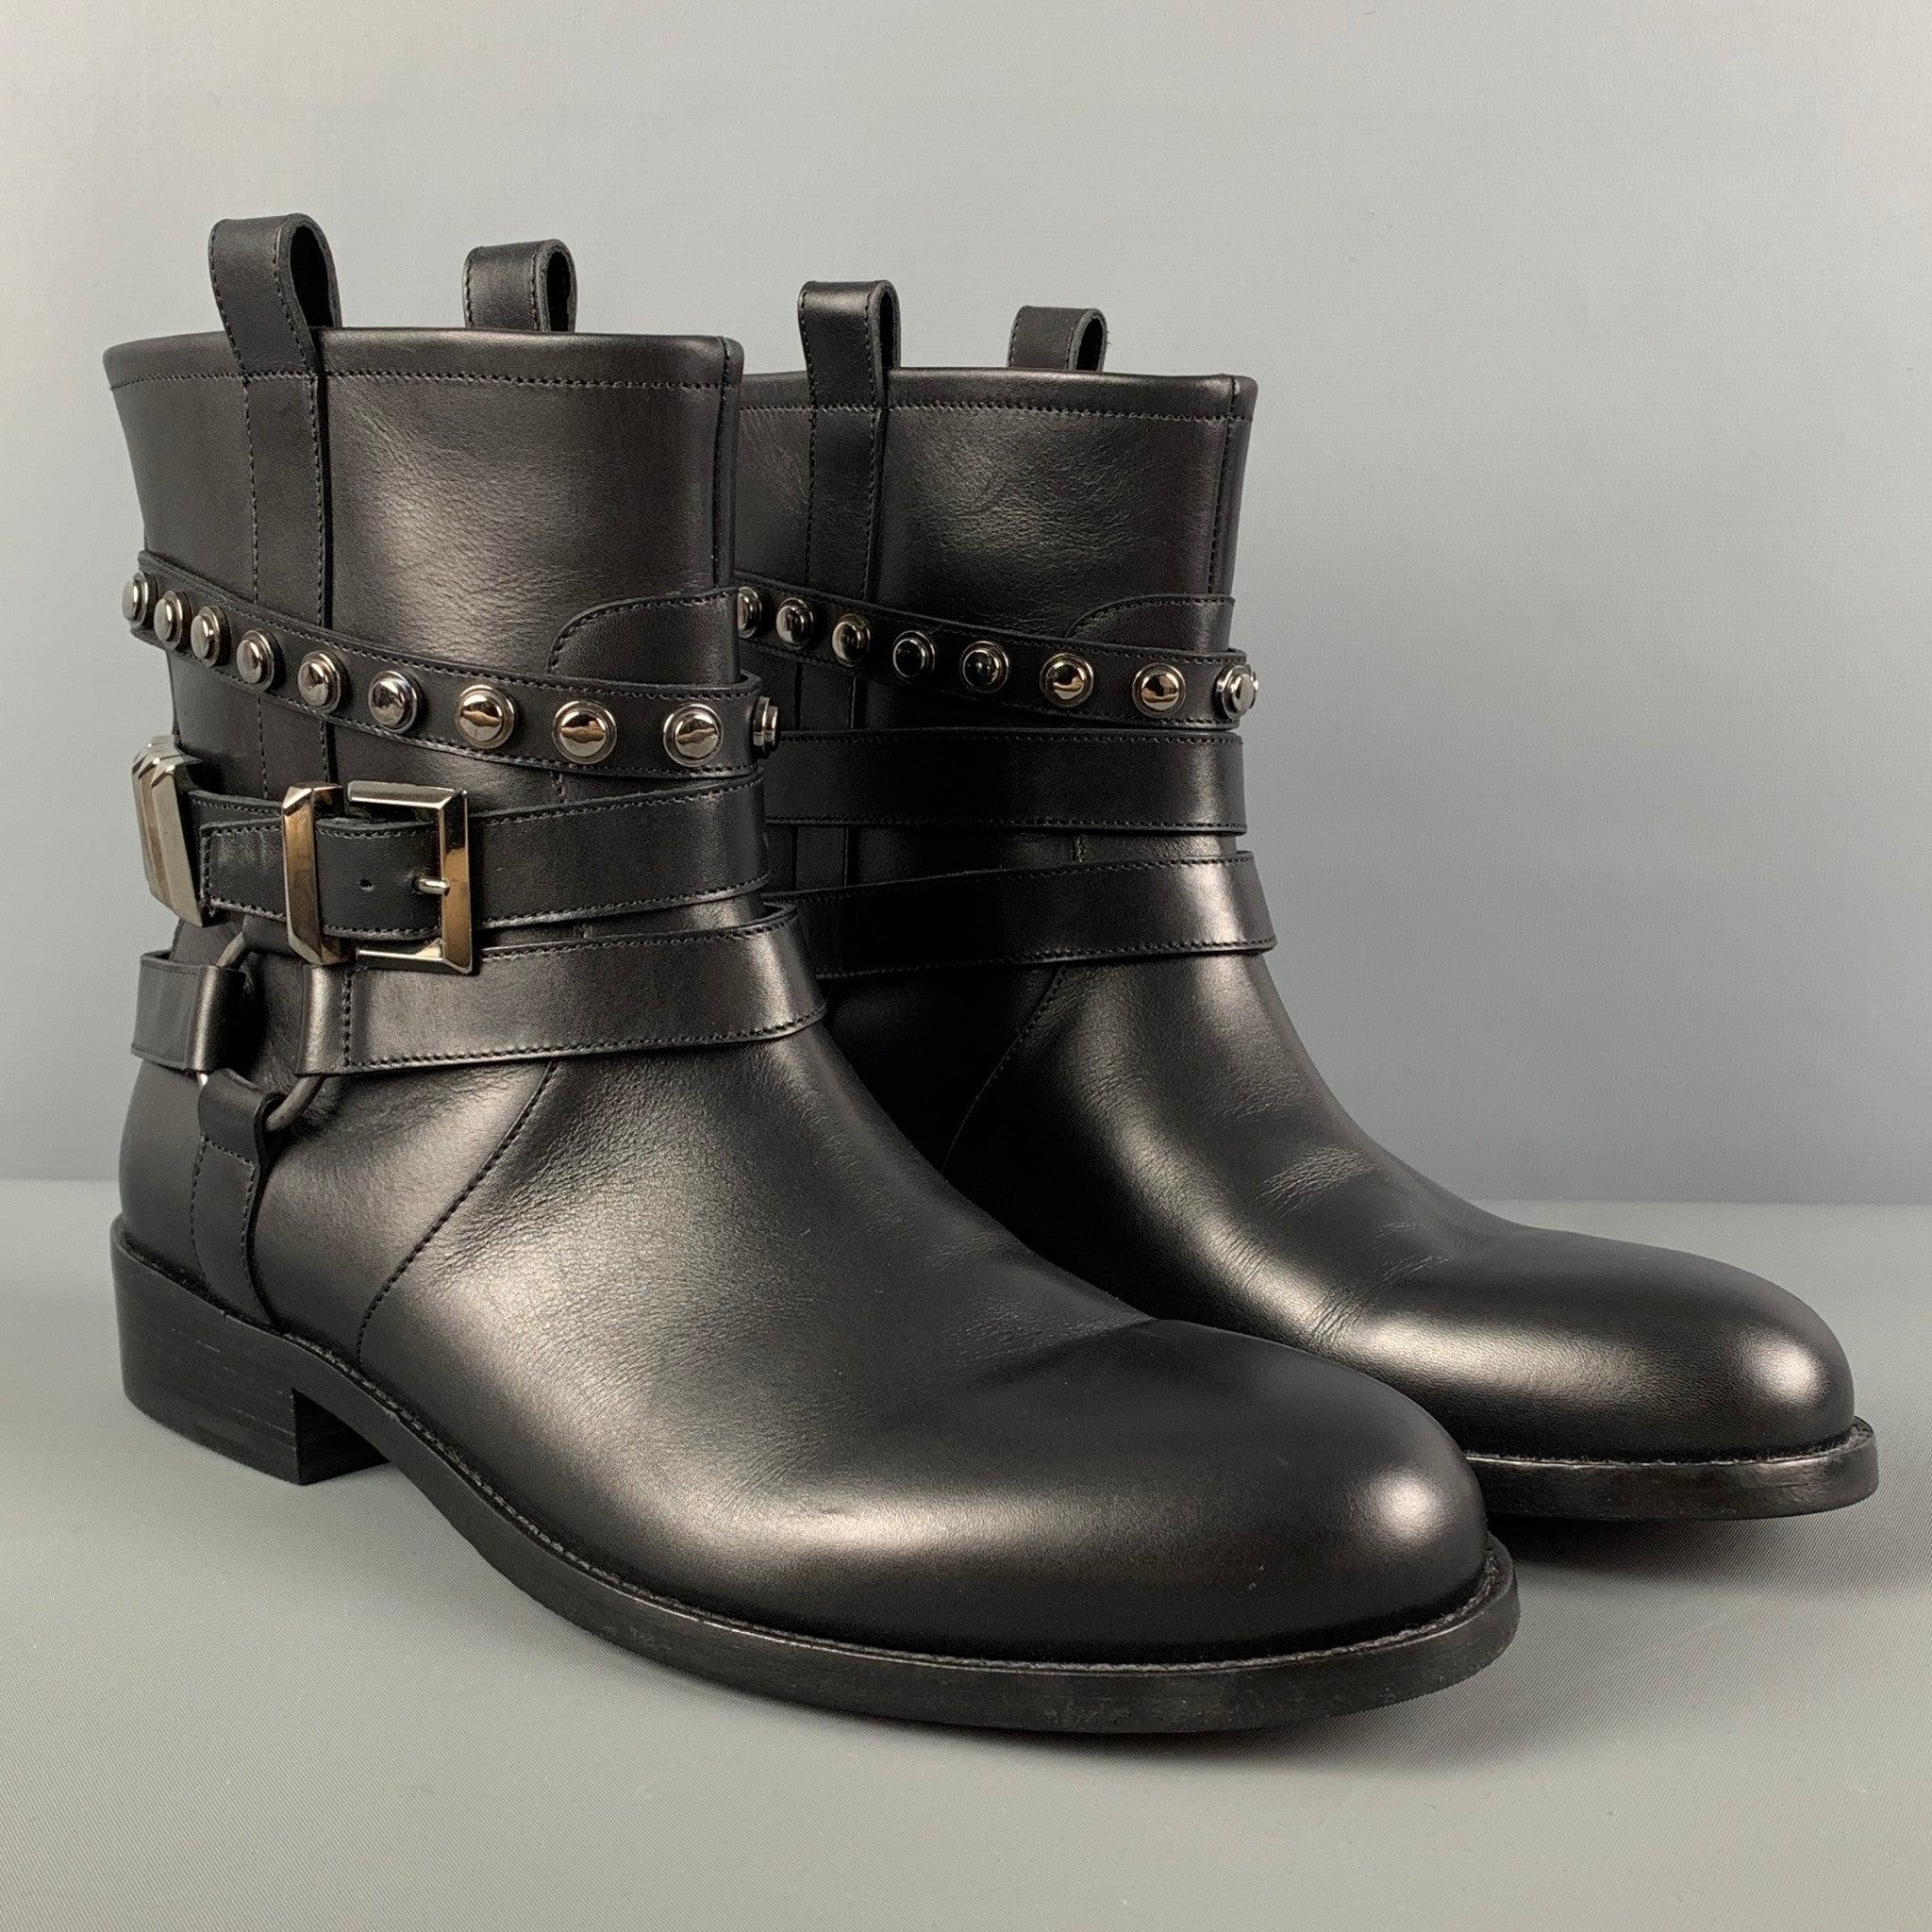 CASADEI boots comes in a black leather featuring silver tone hardware, multi strap design, pull on style, and a chunky heel. Made in Italy.
Excellent
Pre-Owned Condition. 

Marked:   42.5 

Measurements: 
  Length: 11.75 inches Width: 4.25 inches